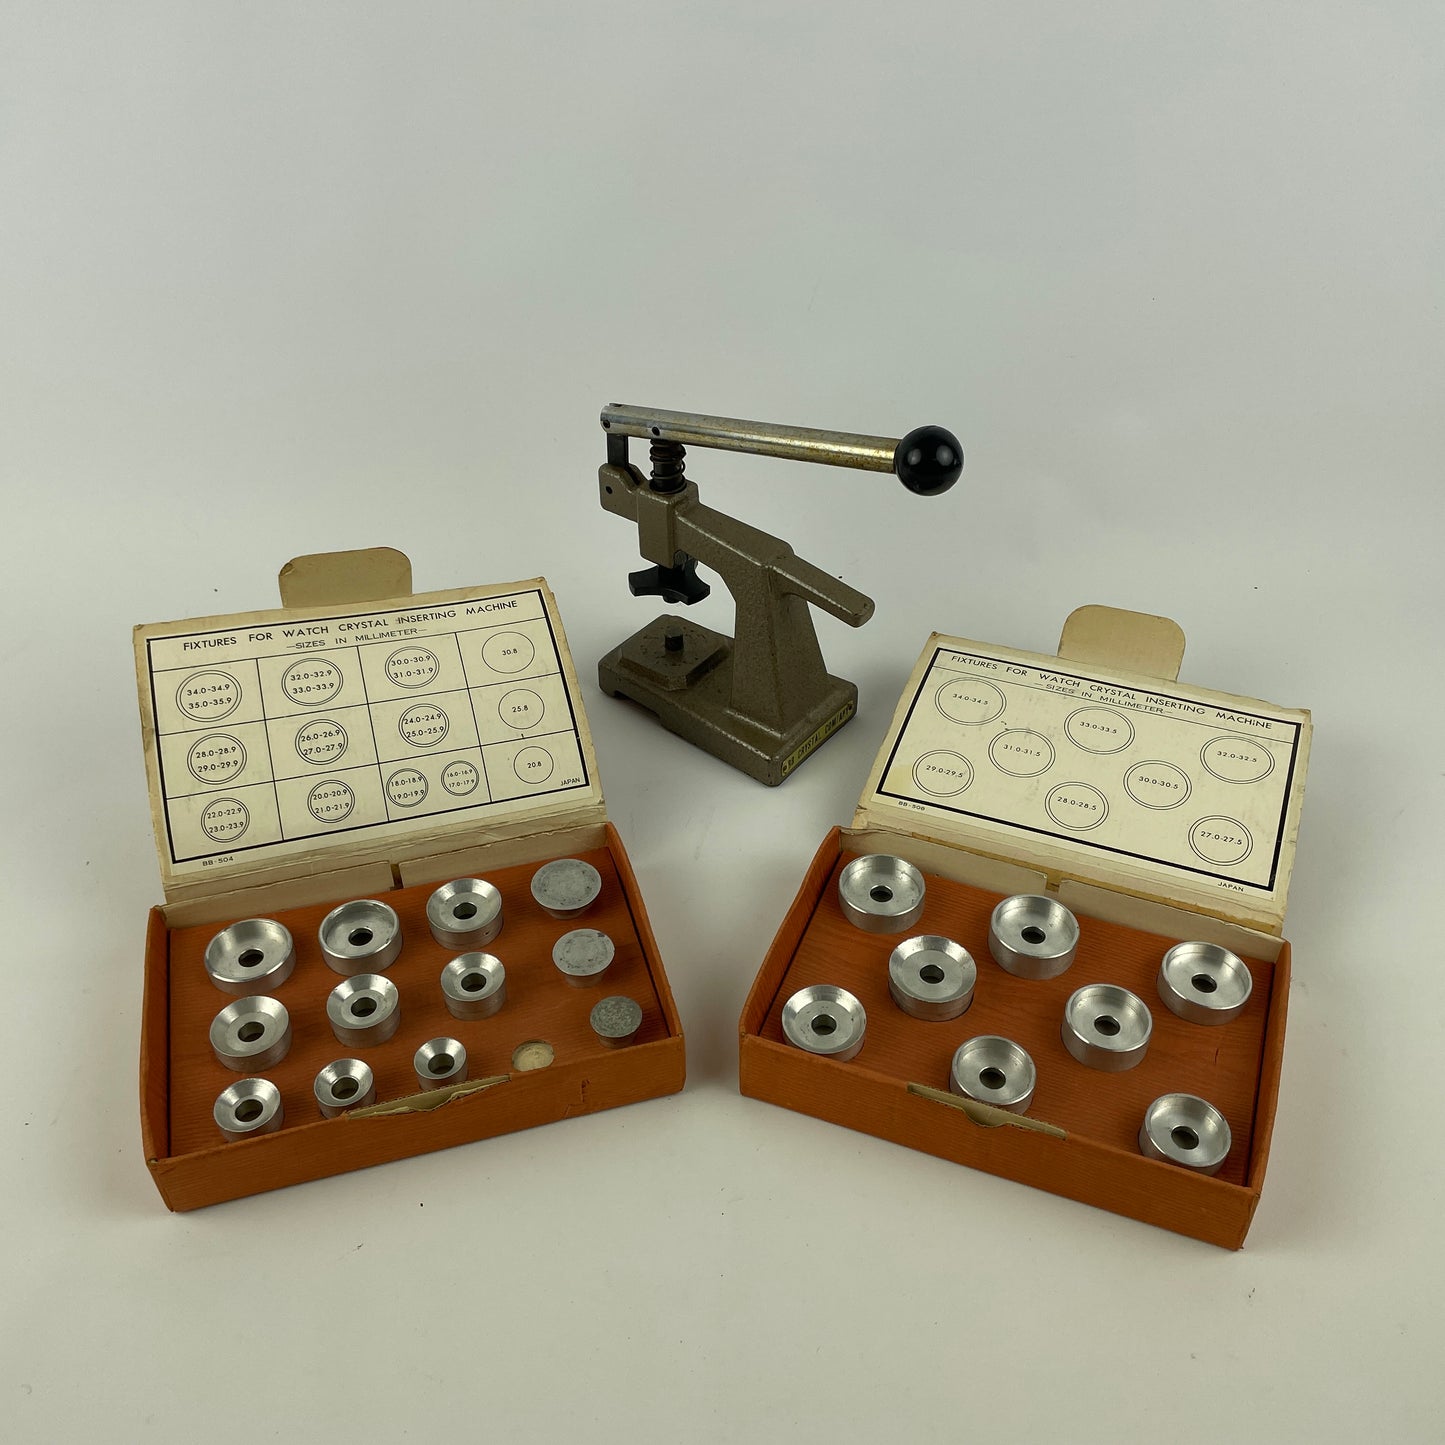 Jan Lot 52- Watchmaker’s Bench top Crystal Machine with Two Boxes of Metal Dies